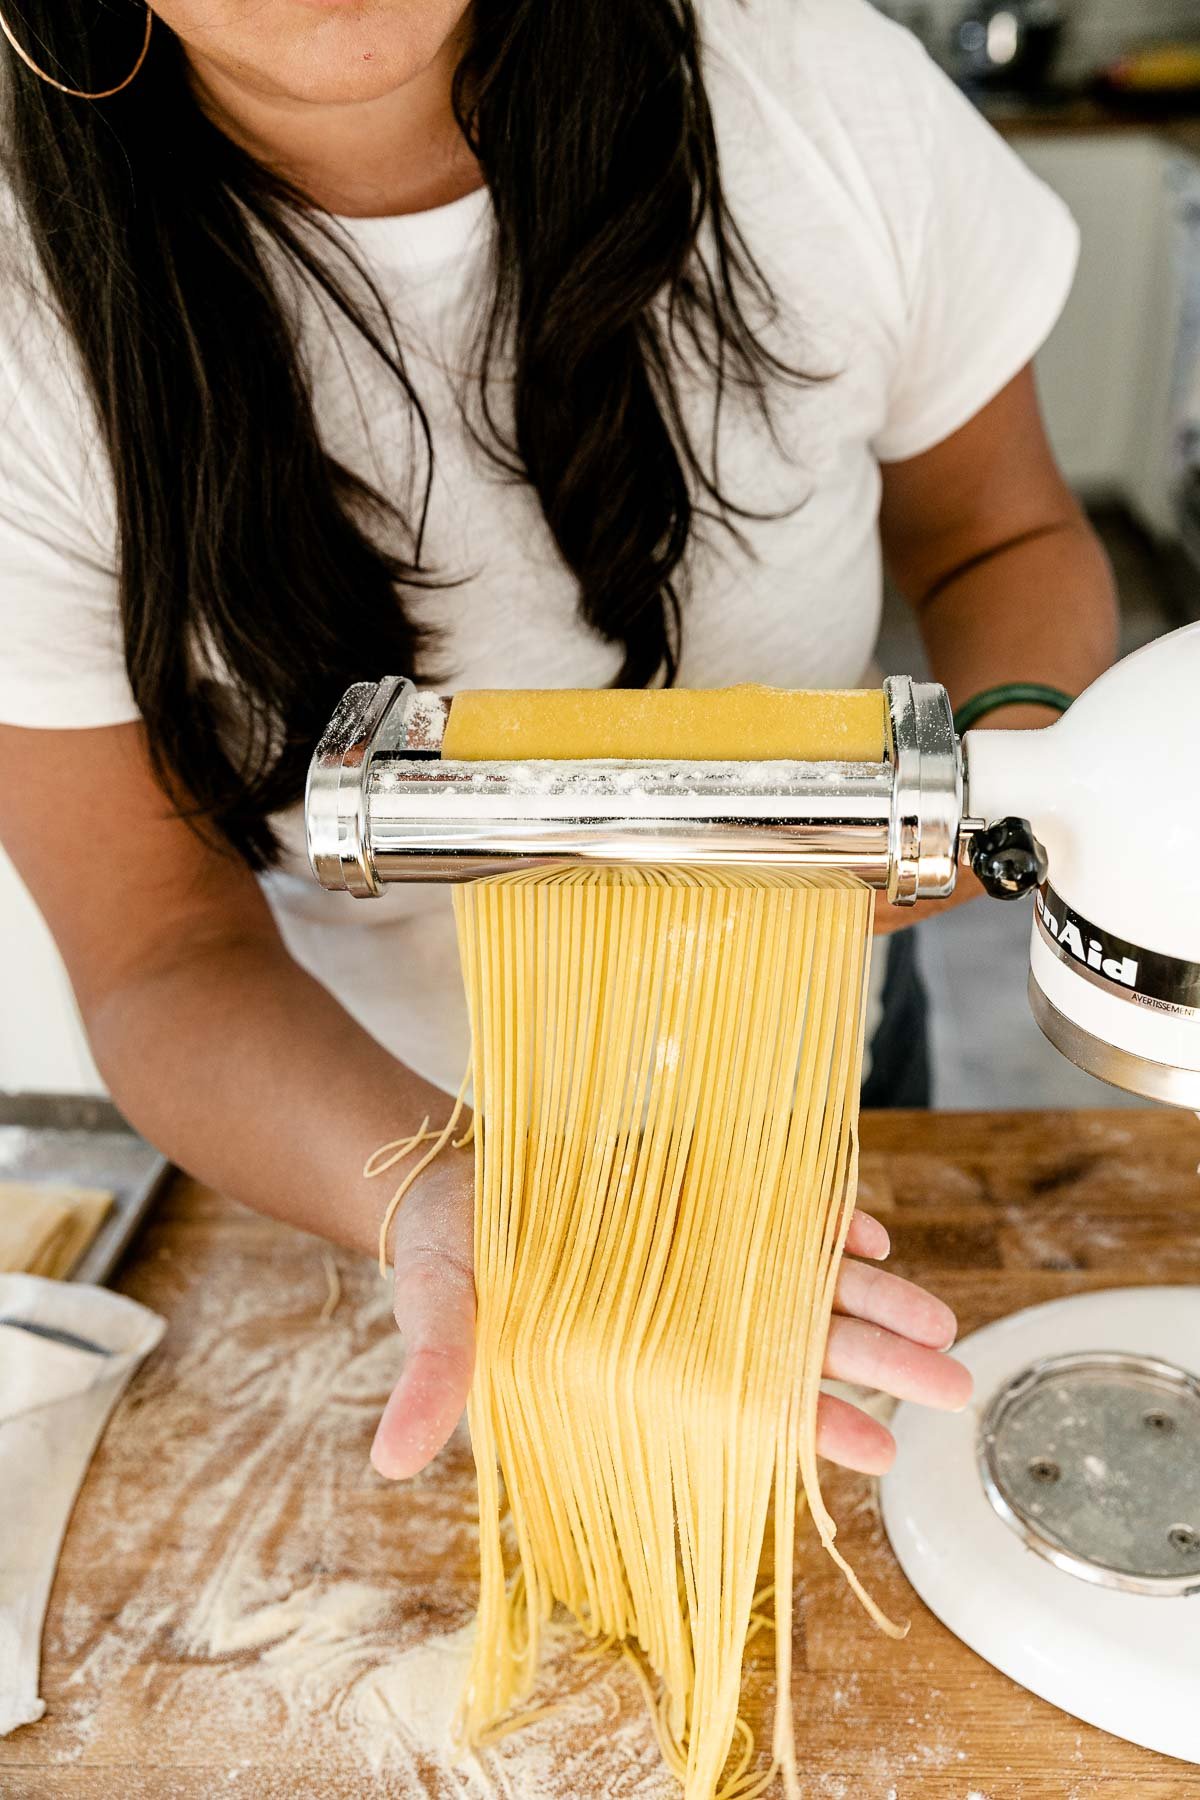 Jess of Plays Well With Butter feeds a large sheet of fresh pasta dough through a KitchenAid pasta cutting attachment connected to a Stand Mixer. As the pasta dough is fed through the cutter, the dough is cut into single strands of spaghetti. Her right hand catches the spaghetti noodles and lifts them up slightly with a flat palm to display the cut noodles and allow them to rest gently on the countertop. The Stand Mixer rests atop a butcher block countertop. The countertop has been lightly dusted with flour and an aluminum baking sheet also sits on top of the countertop and is covered by a kitchen towel.